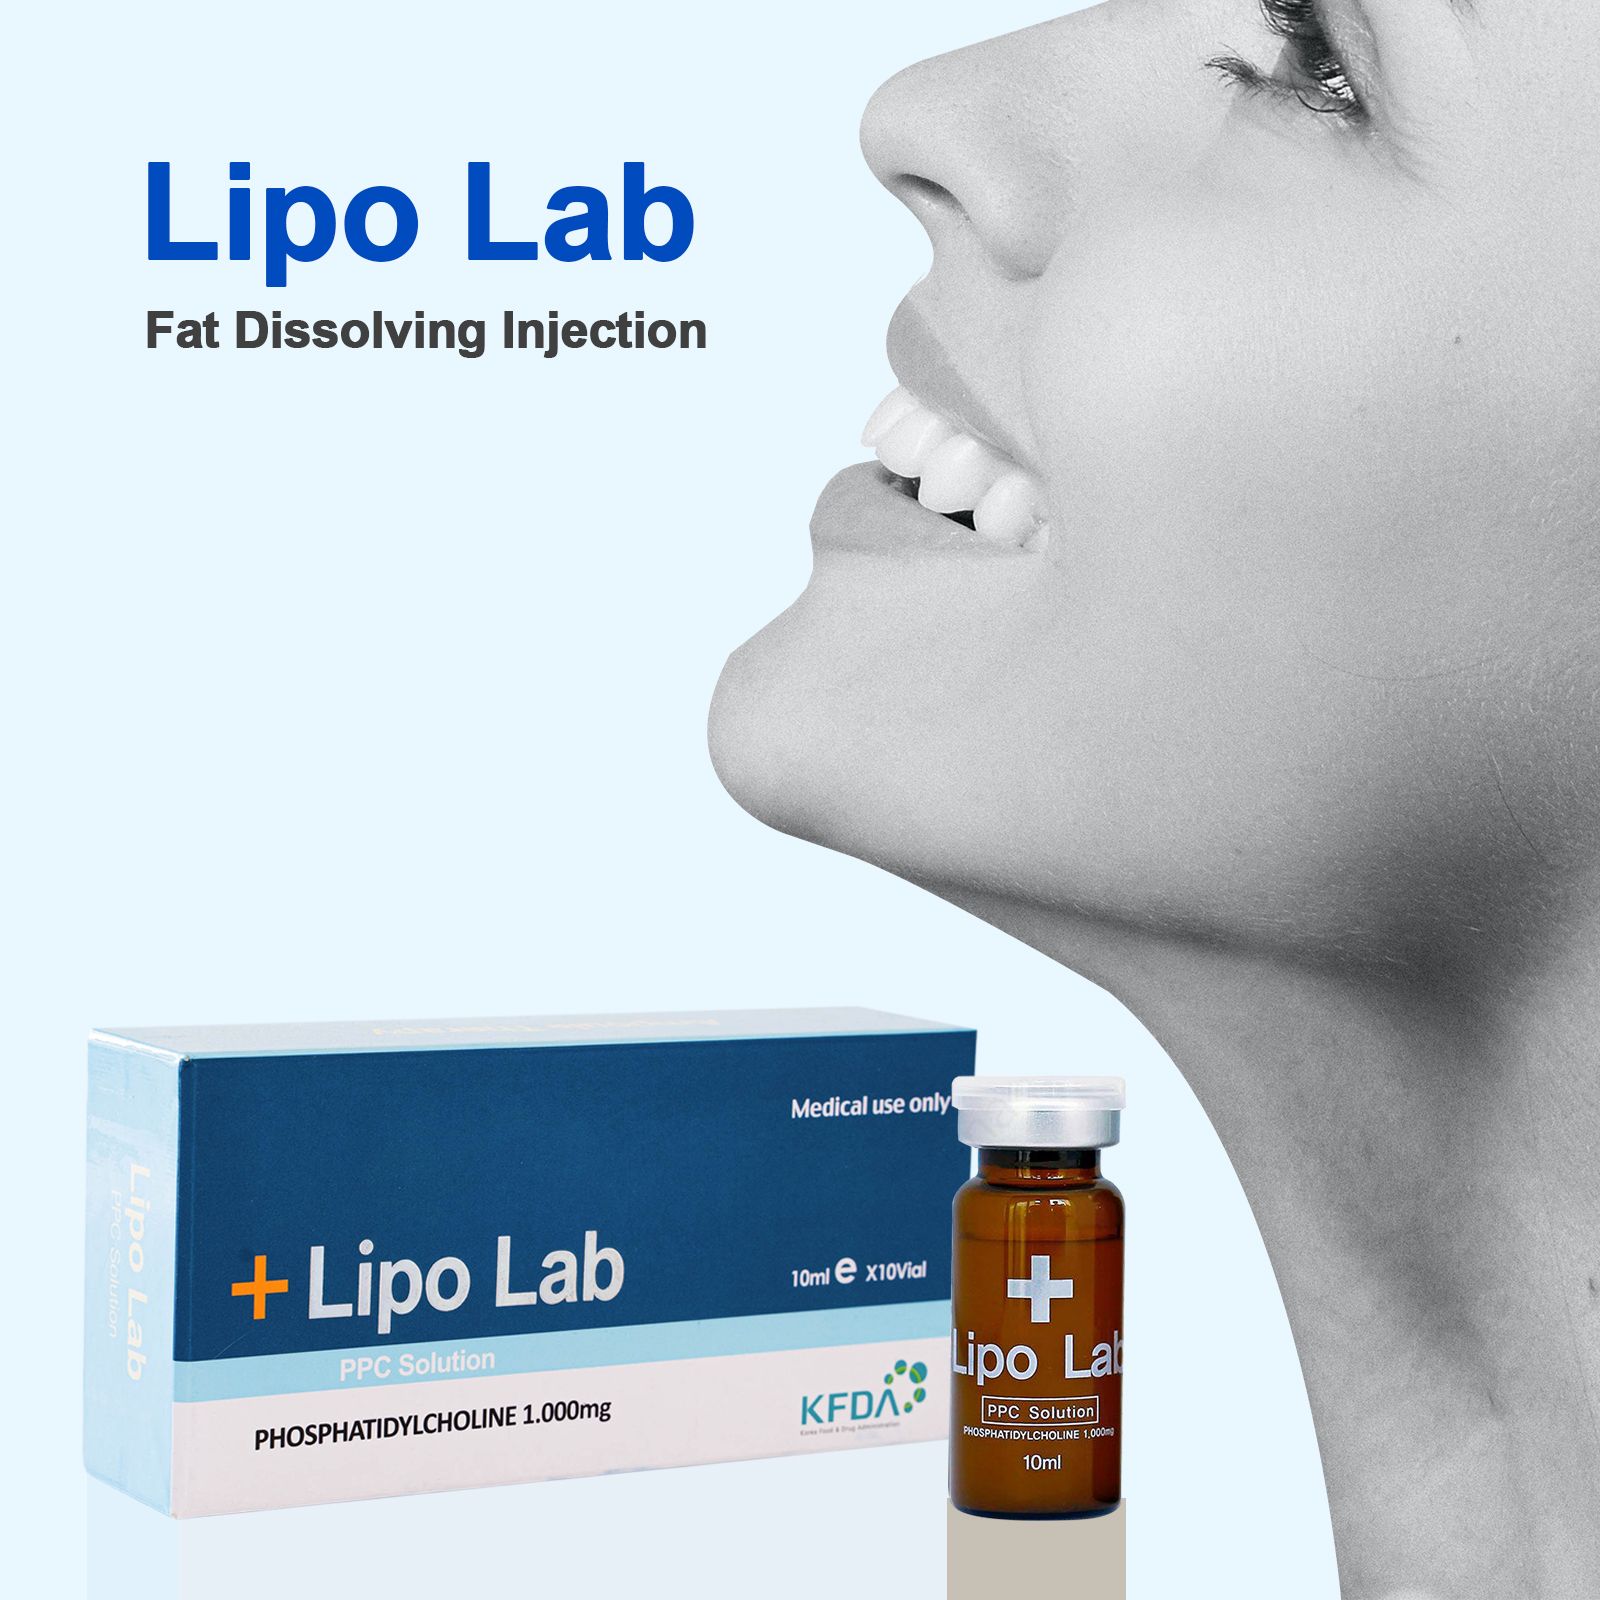 lipo lab fat dissolving solution injection slimming kit manufactures with best price